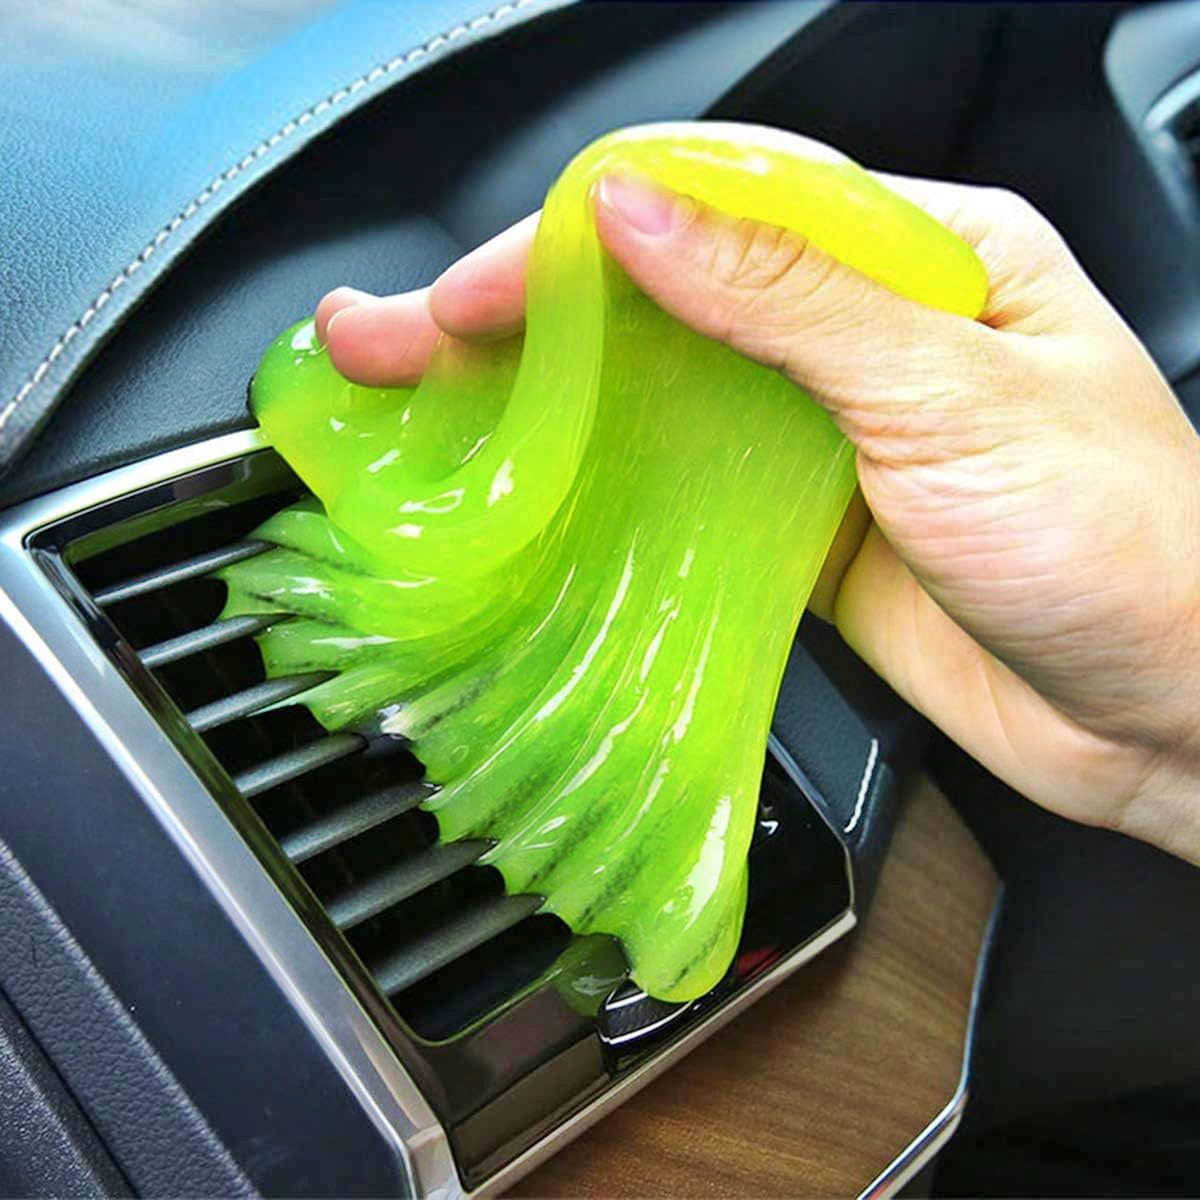  Scented Car Cleaning Gel for Detailing - Pack of 4  Biodegradable Slime for Cleaning Car Interior - Perfect Keyboard Cleaner  Gel to Make Your Car Shine - Auto Interior Cleaner (5.6oz/pcs) : Automotive